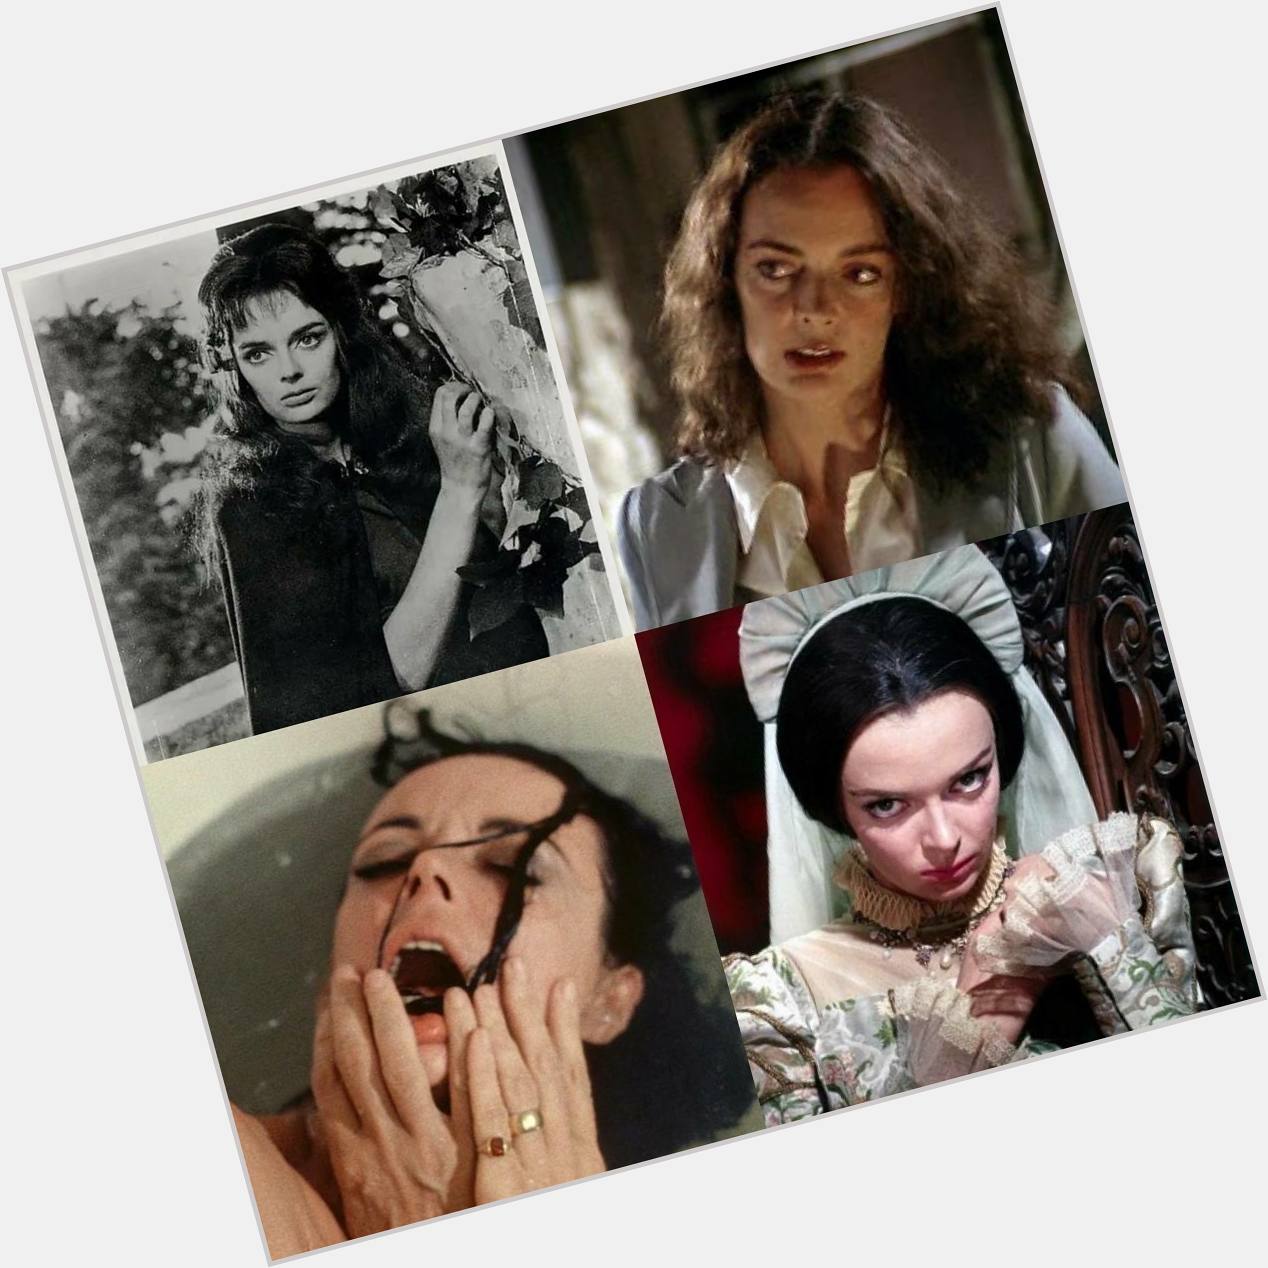 Happy birthday to the Queen of Gothic horror, Barbara Steele.  